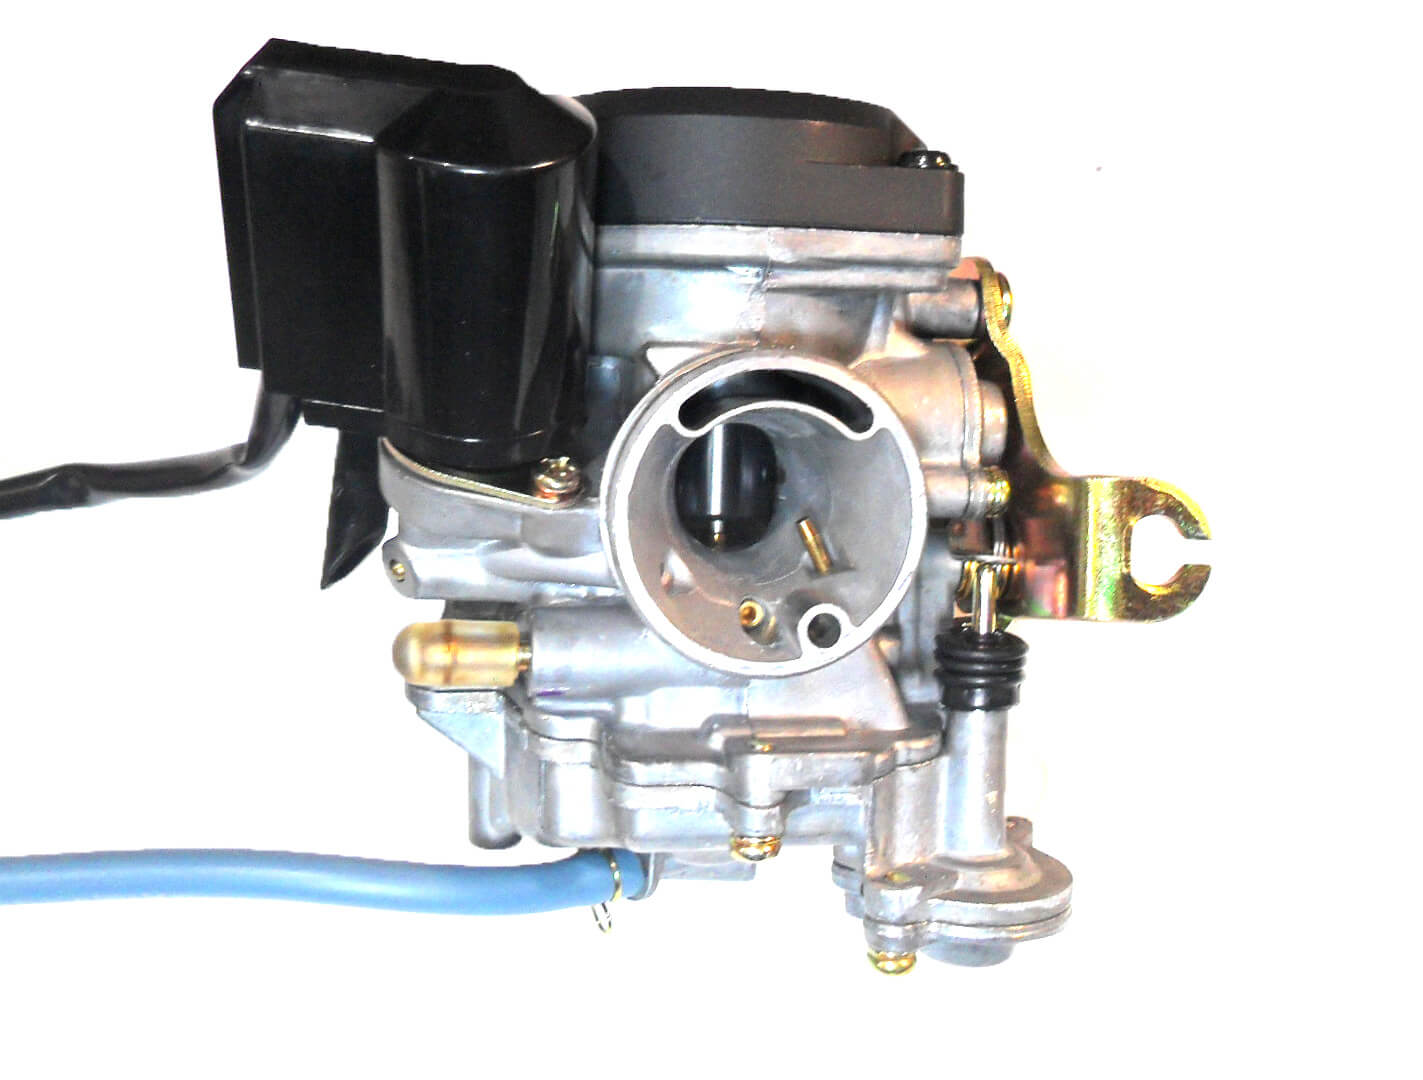 Runtong CVK PD19J Carburetor with booster pump Intake ID=19 OD=28 Air Box OD=40 Fits Most 49-100cc GY6 Belt Driven Scooters